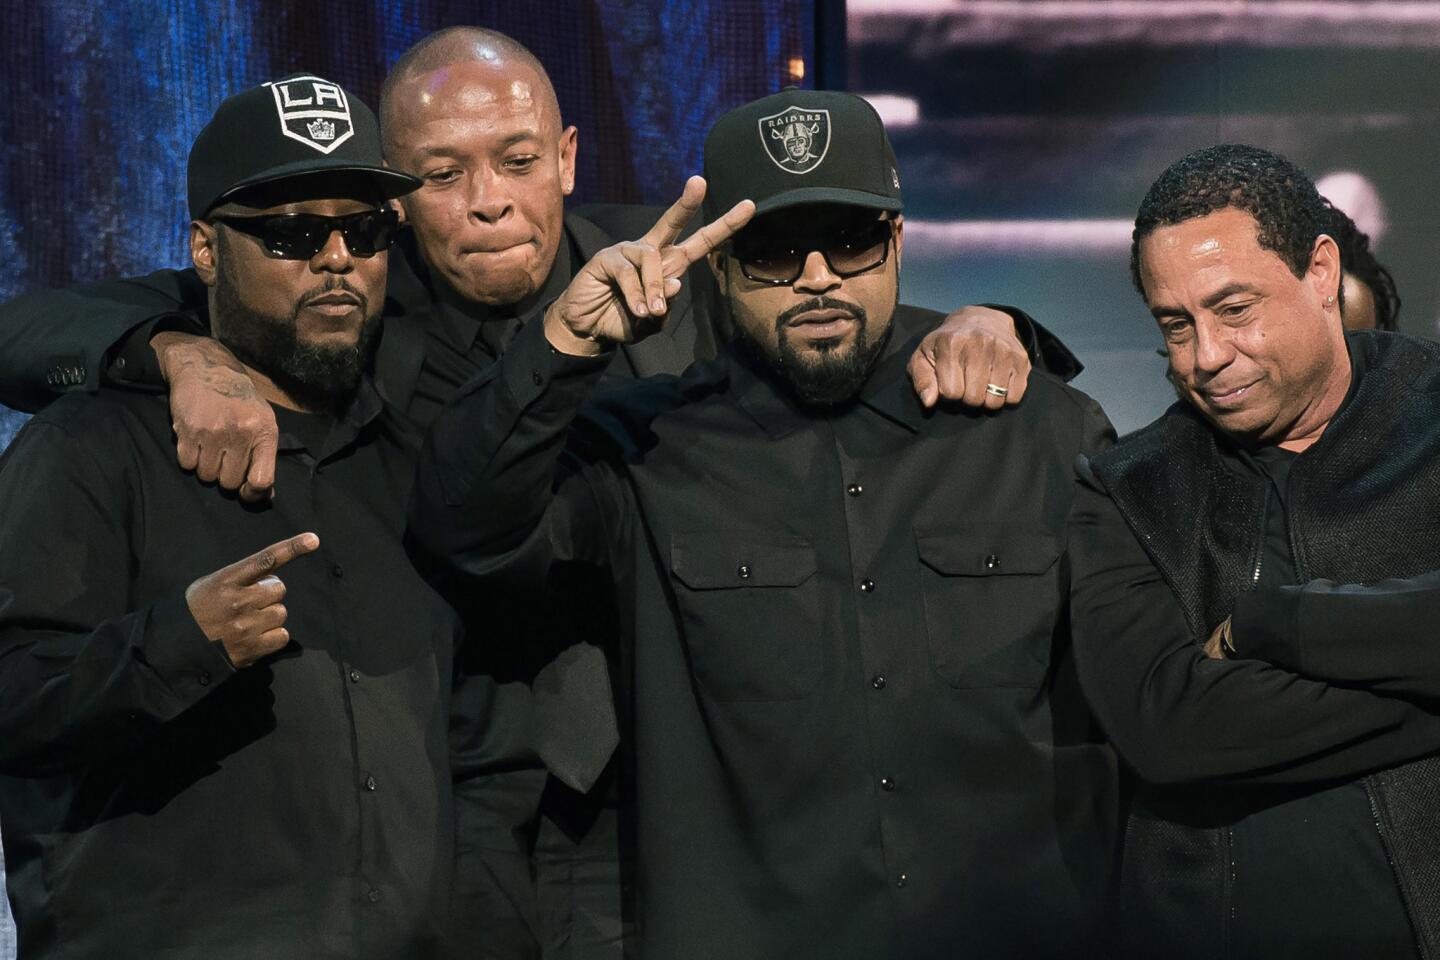 Inductees MC Ren, from left, Dr. Dre, Ice Cube and DJ Yella from N.W.A appear at the 31st Annual Rock and Roll Hall of Fame Induction Ceremony.